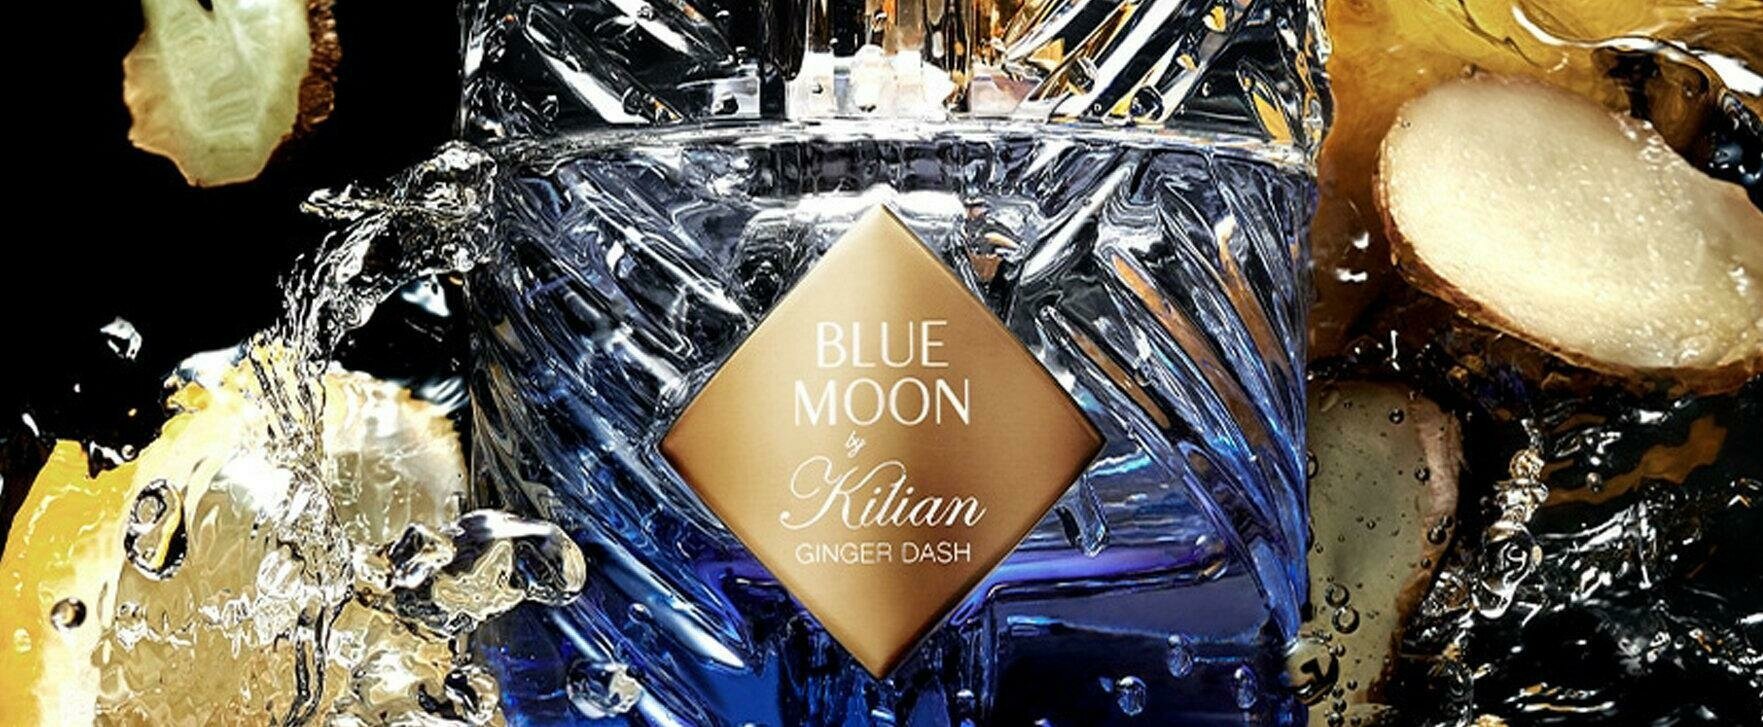 The New Limited Edition Summer Fragrance by Kilian: “Blue Moon Ginger Dash”